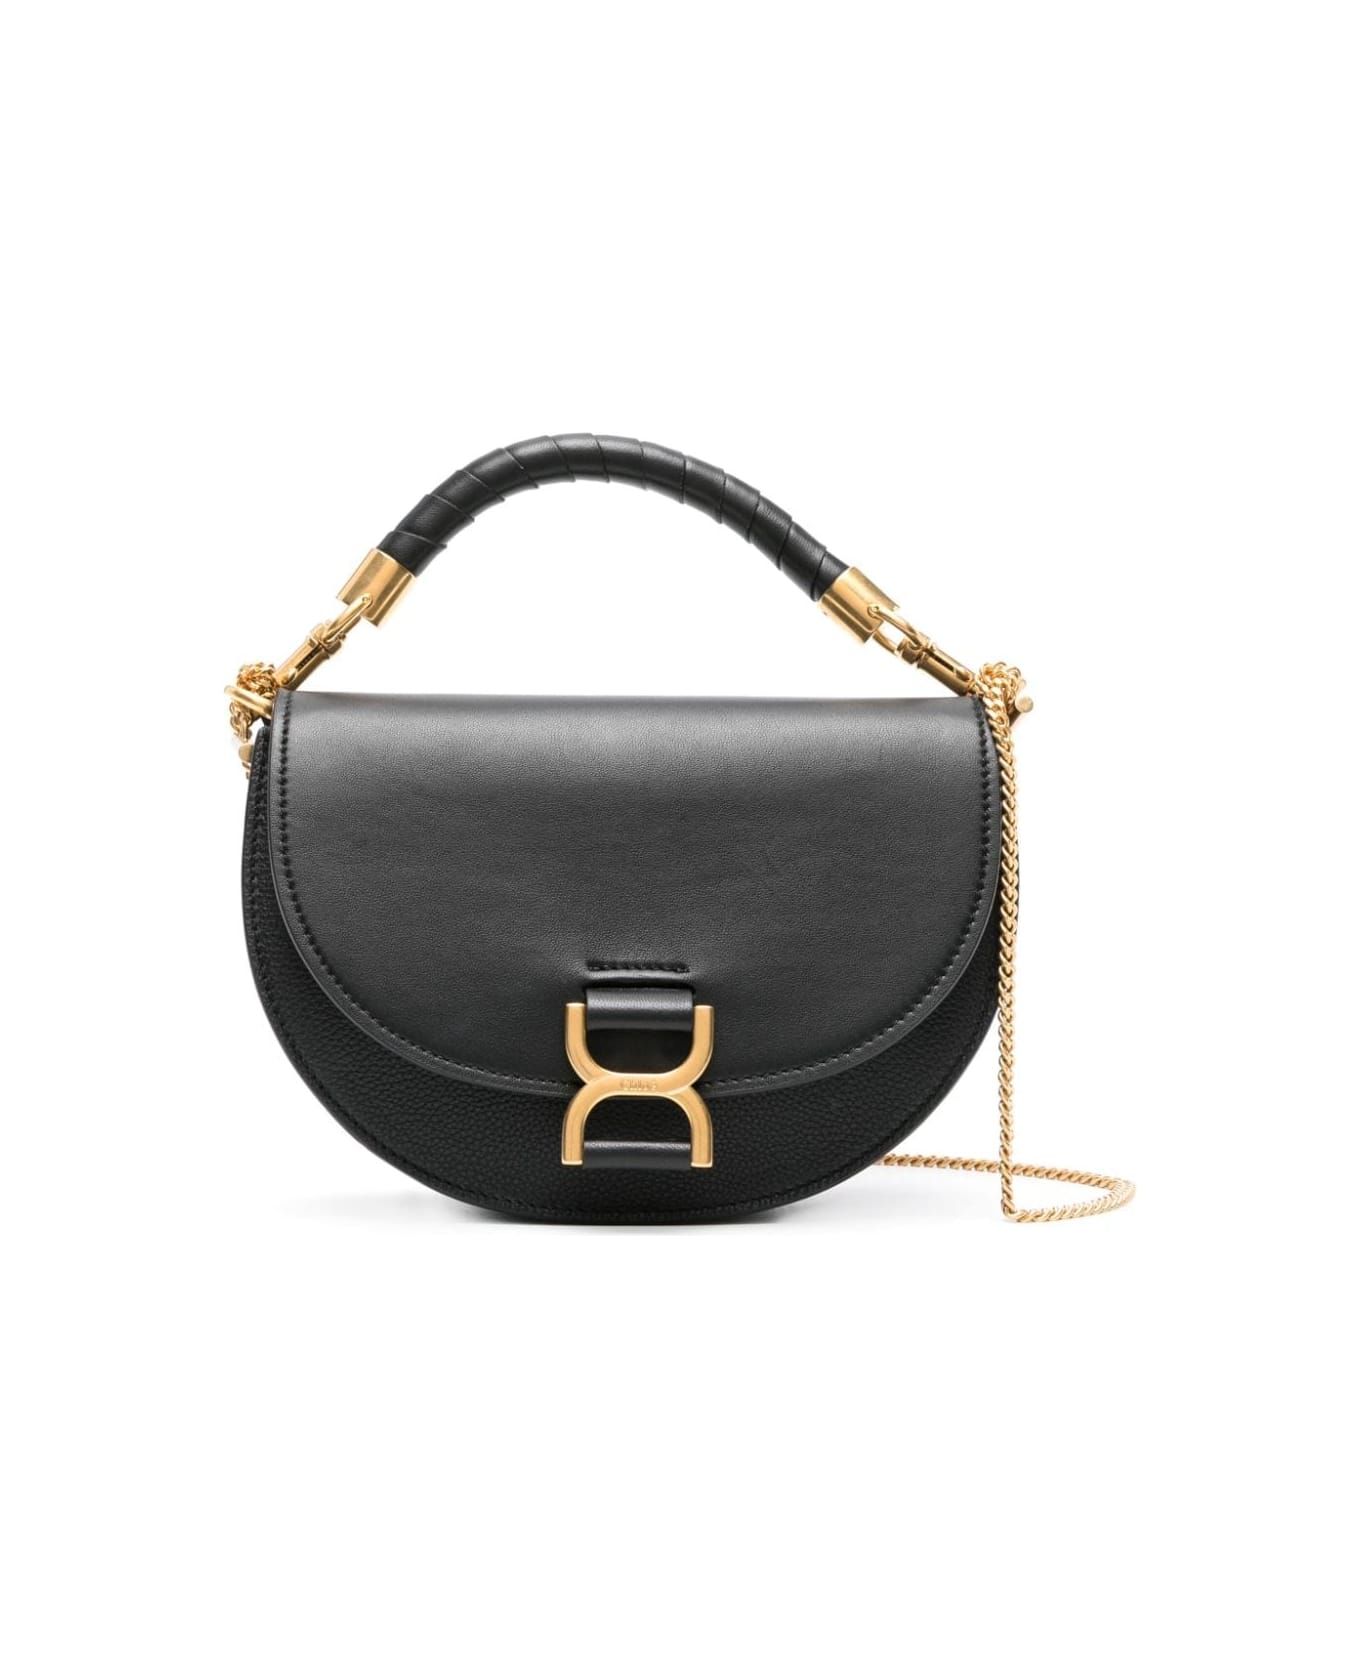 Chloé Black Marcie Bag With Flap And Chain - Black トートバッグ